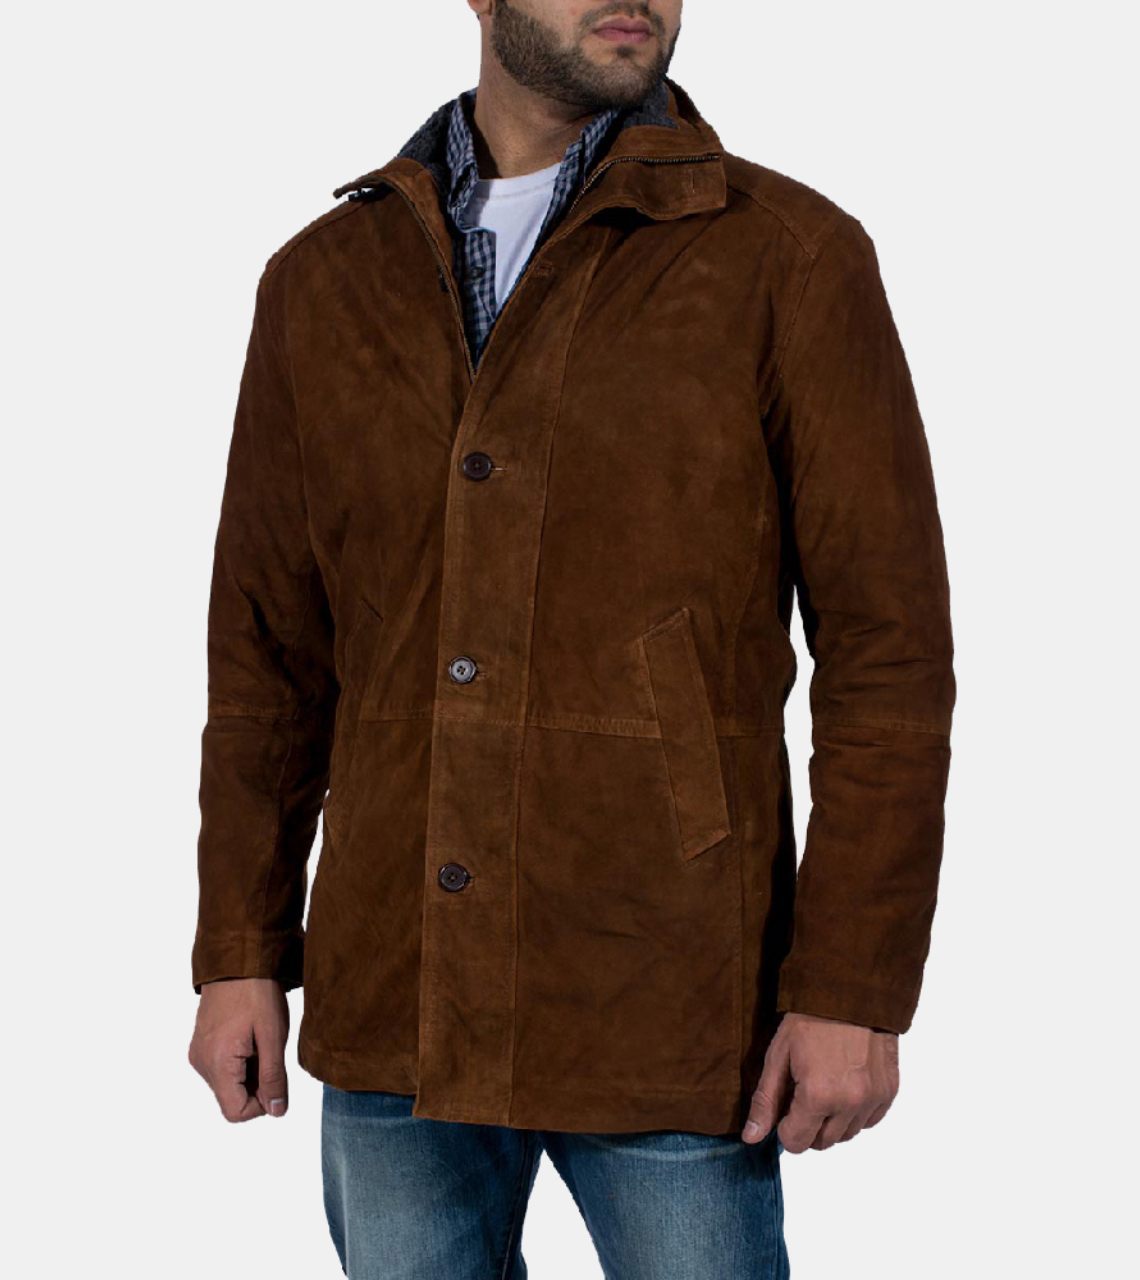 Men's Tanned Suede Leather Jacket 